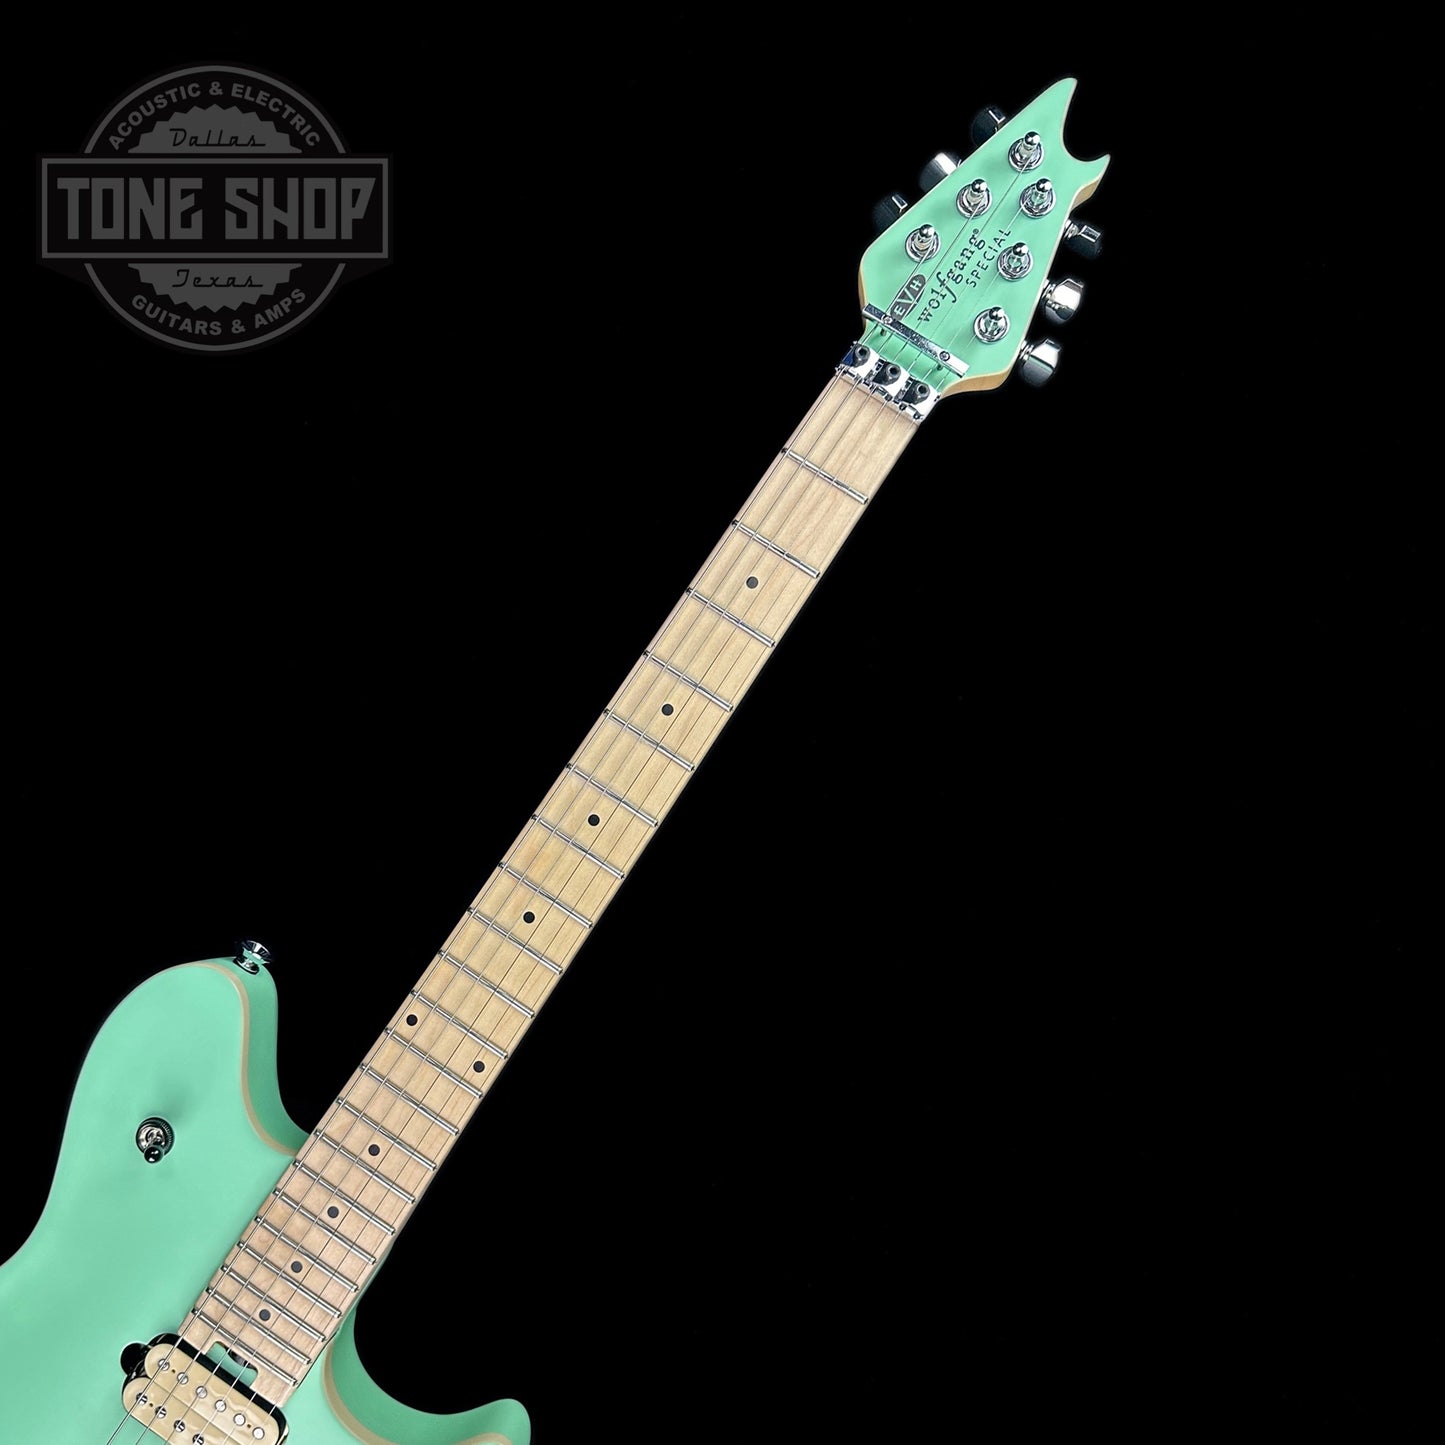 Fretboard of Used EVH Wolfgang Special Matte Surfgreen.